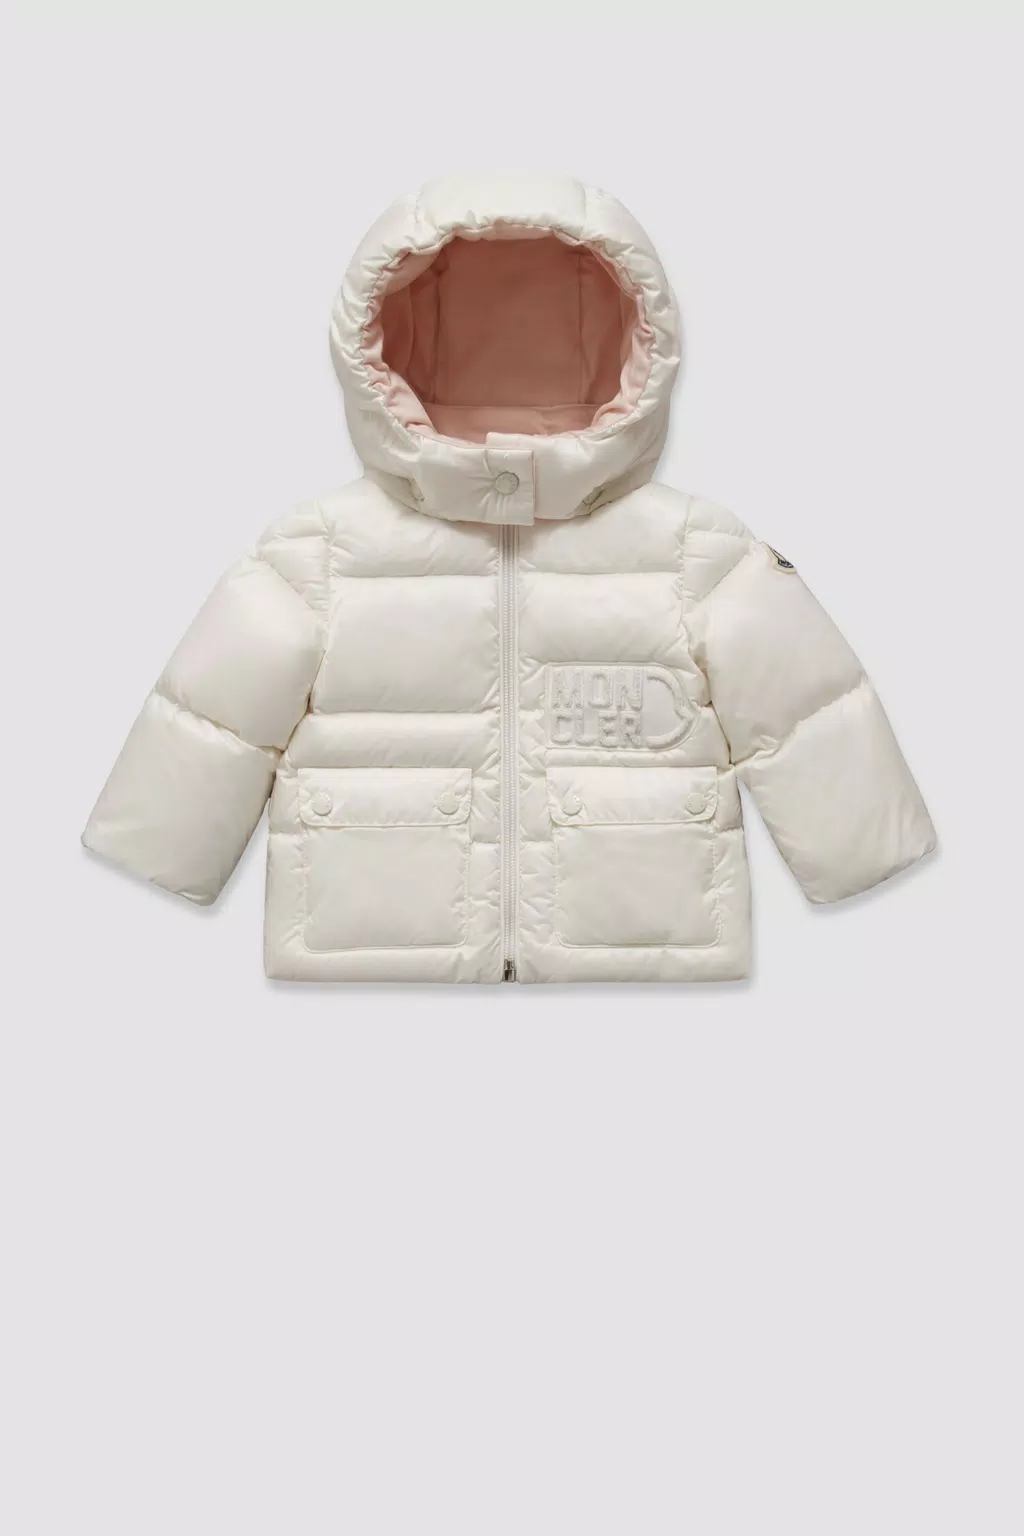 Clothing for Baby Girls - Baby Coats, Jackets & Vests